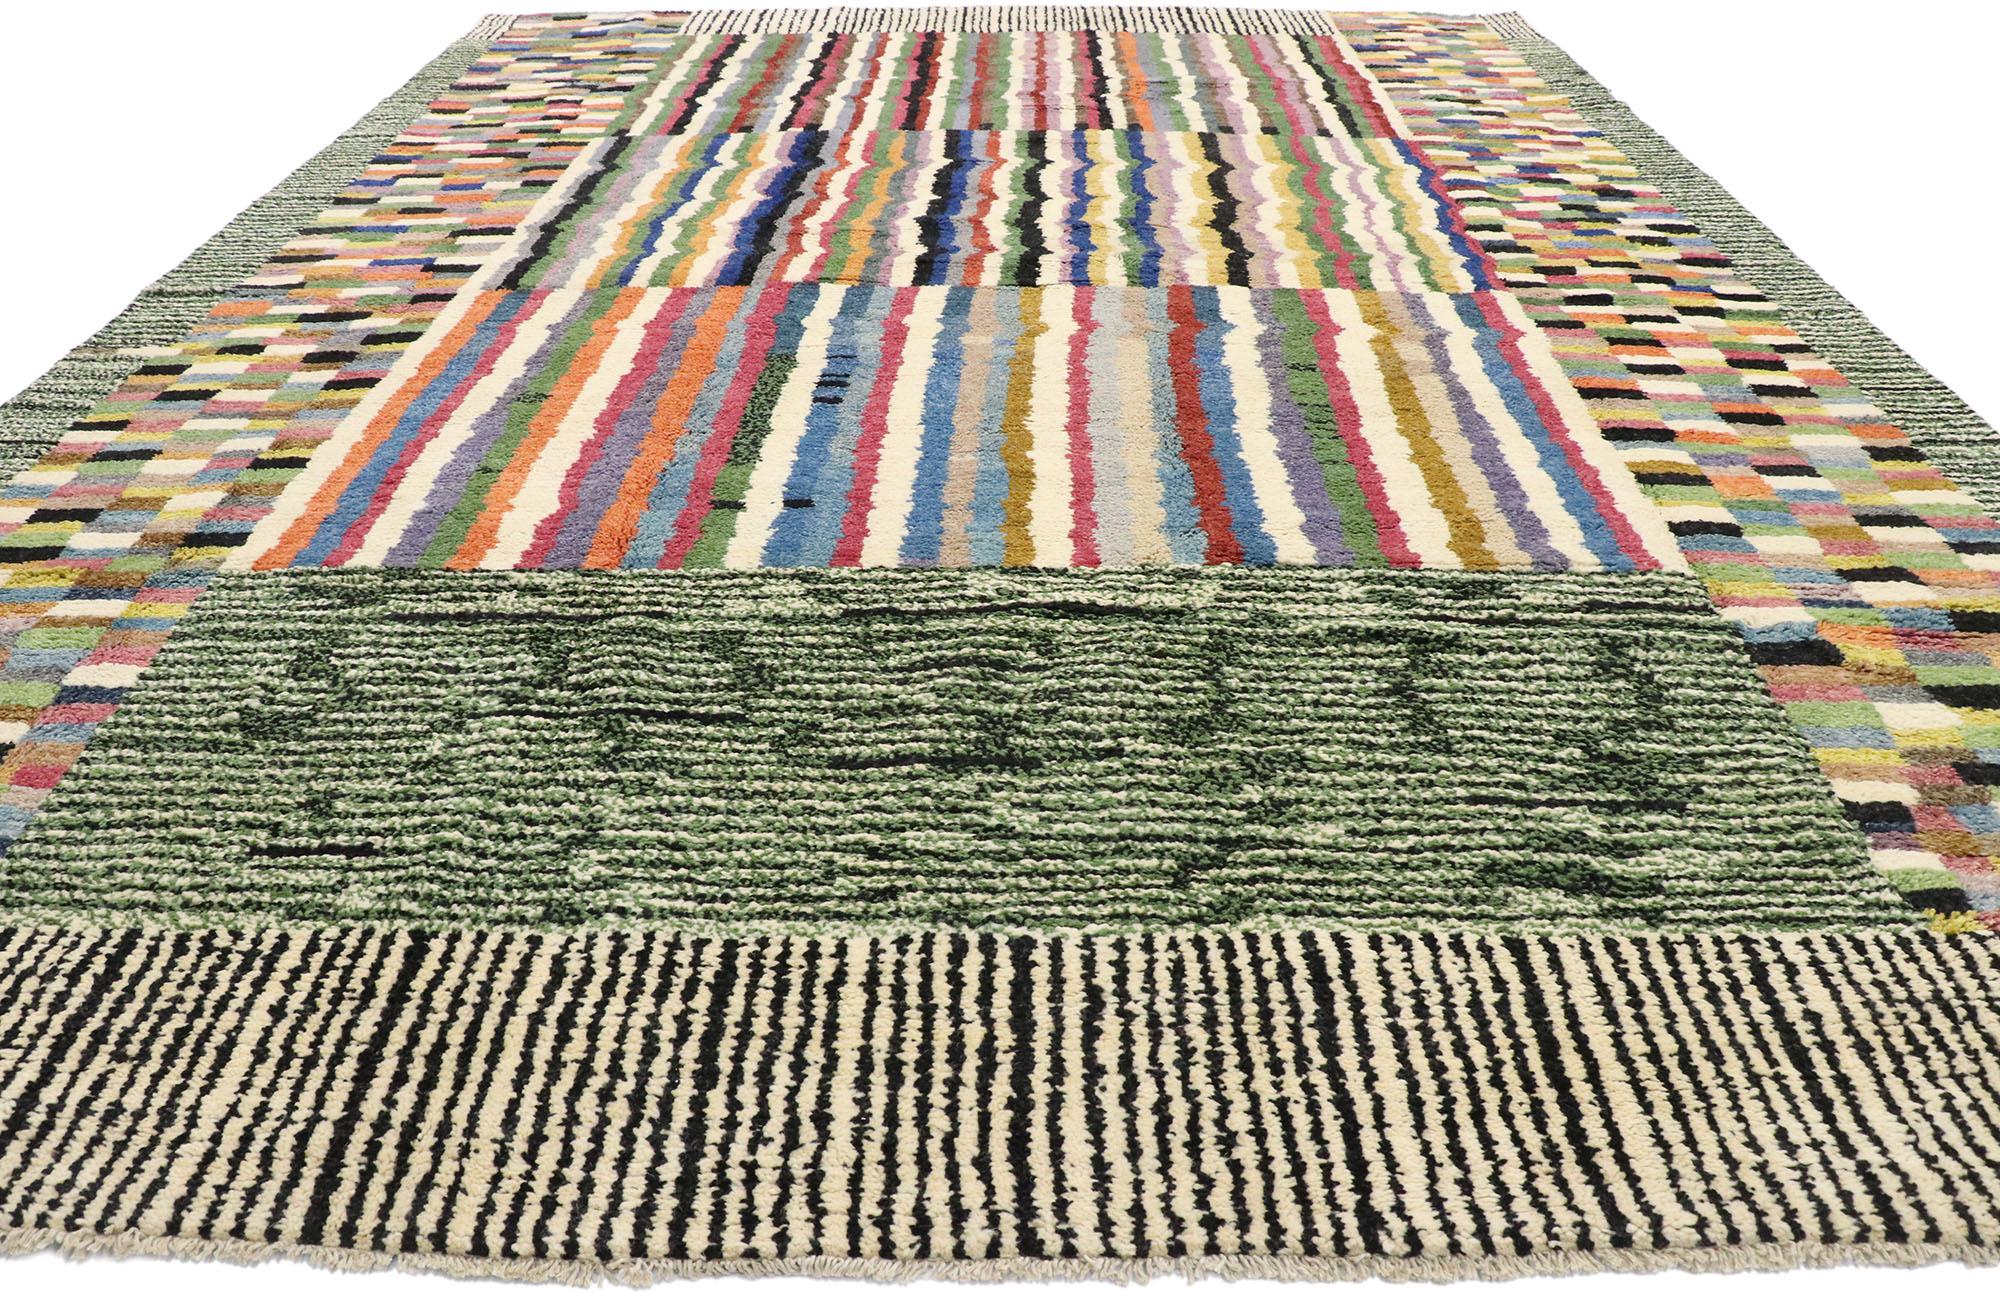 Post-Modern New Contemporary Moroccan Rug Inspired by Ettore Sottsass with Postmodern Style